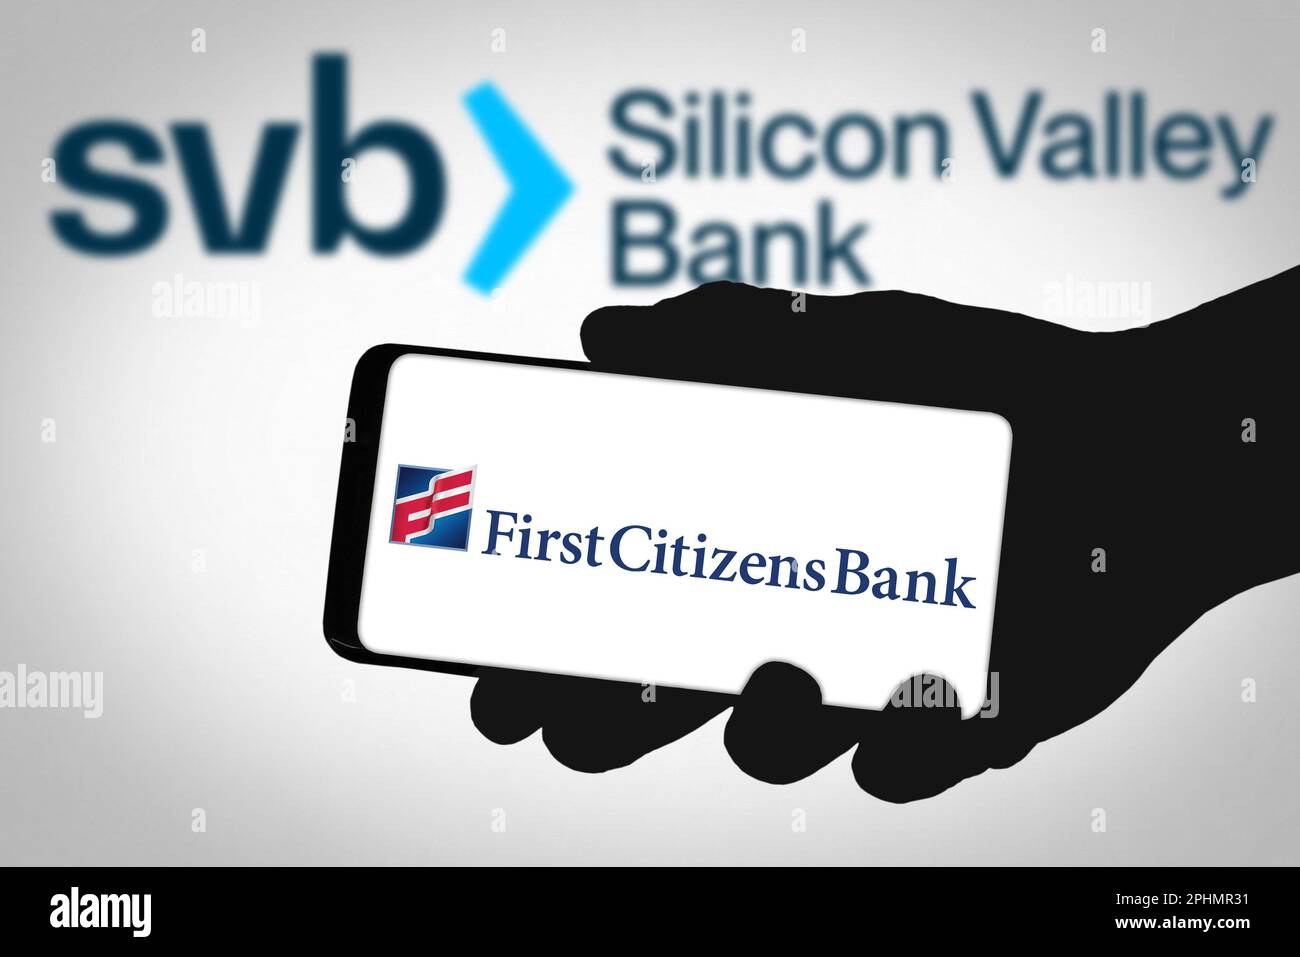 First Citizens Bank and Silicon Valley Bank Stock Photo